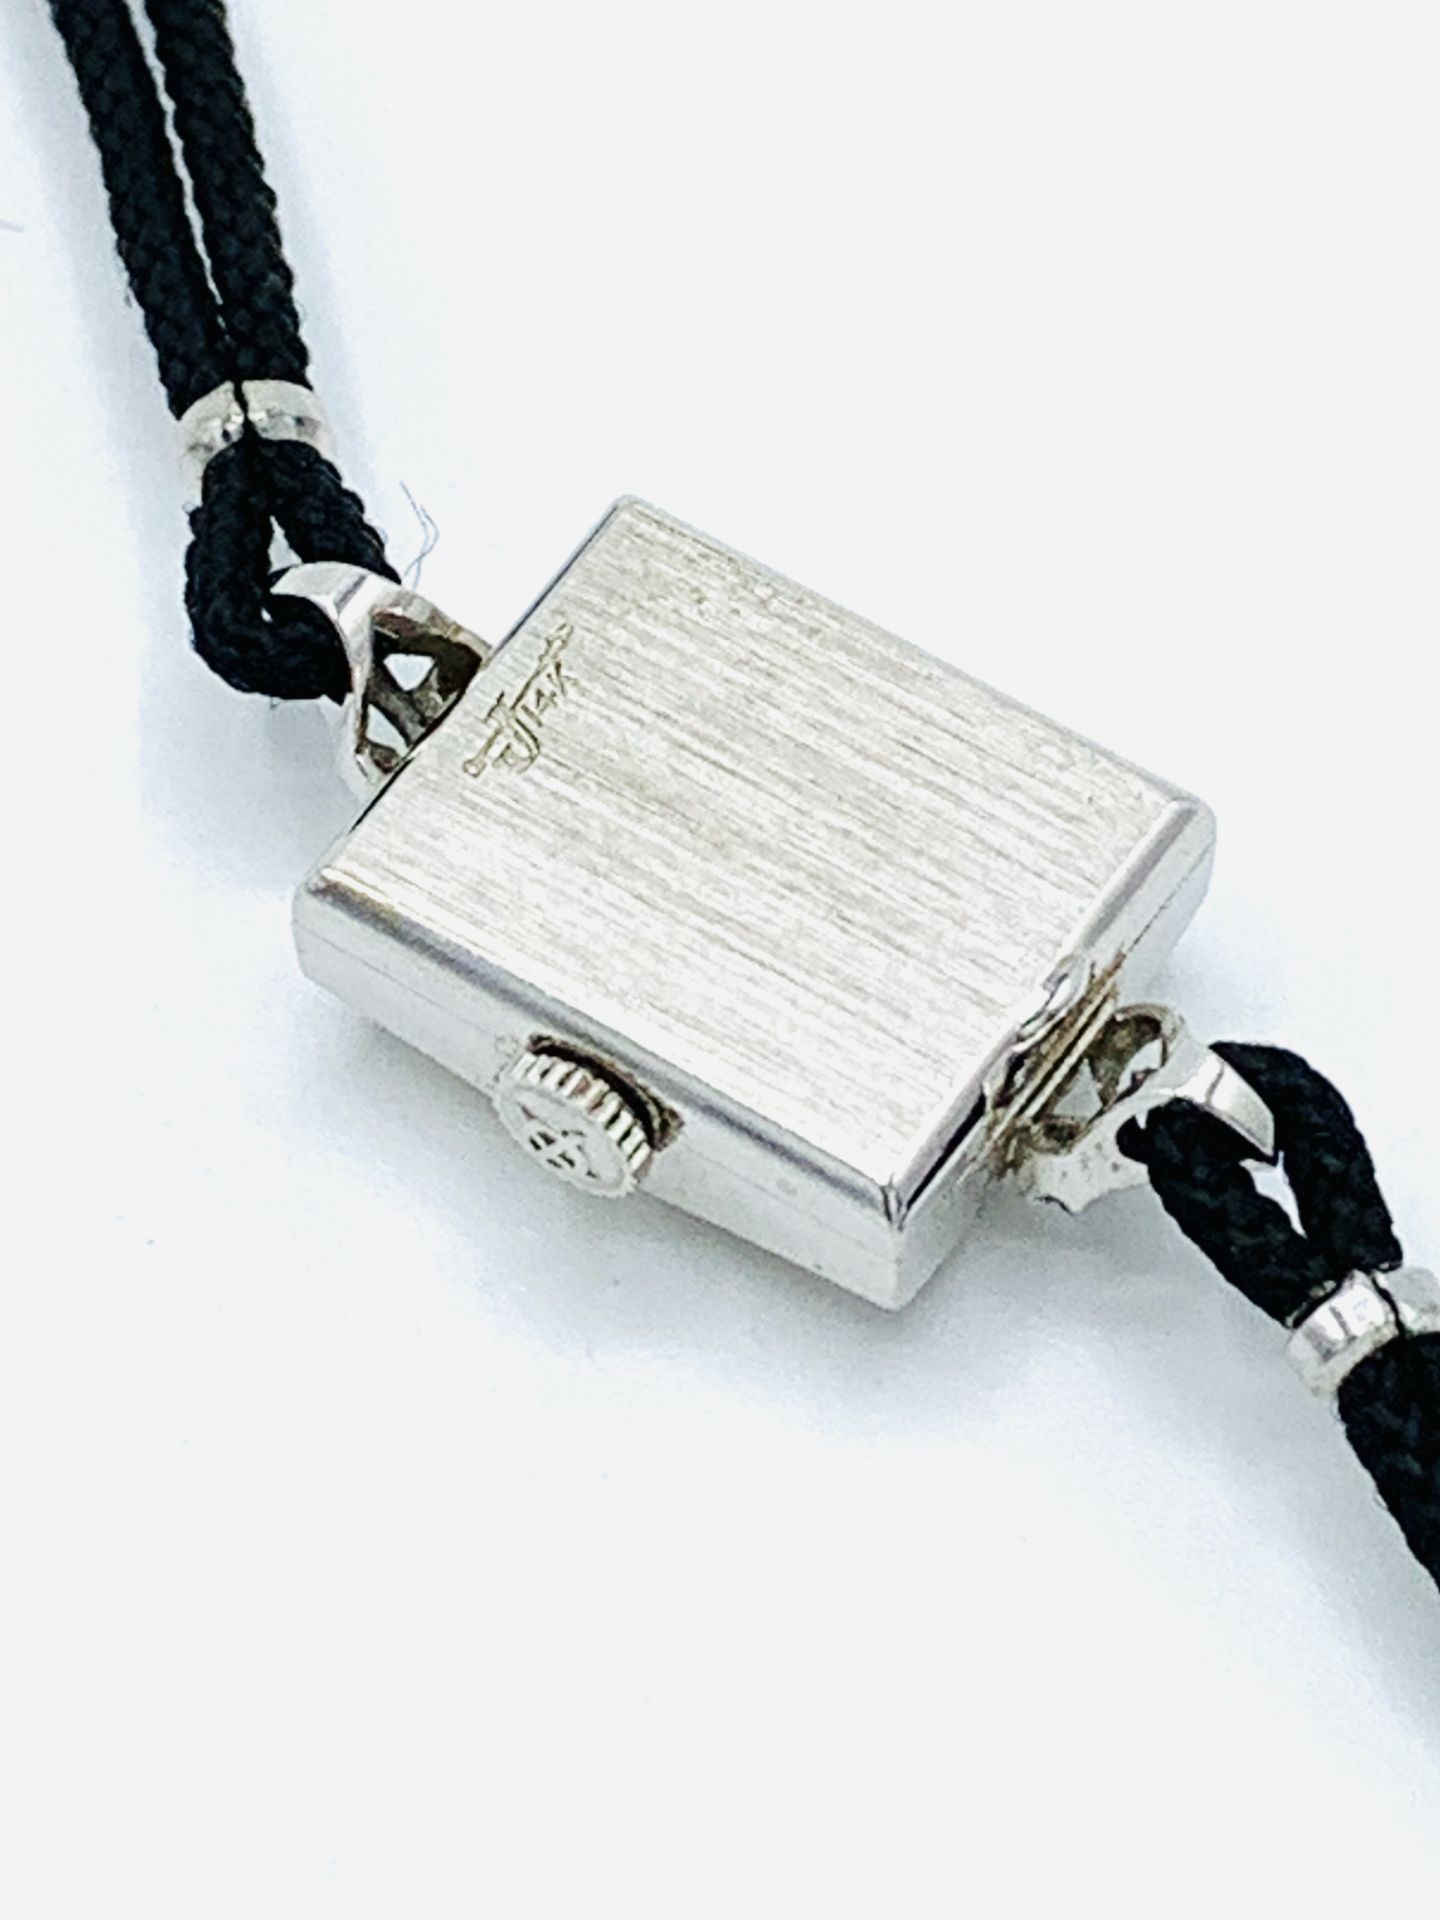 14k white gold cased Zodiac cocktail watch. - Image 3 of 3